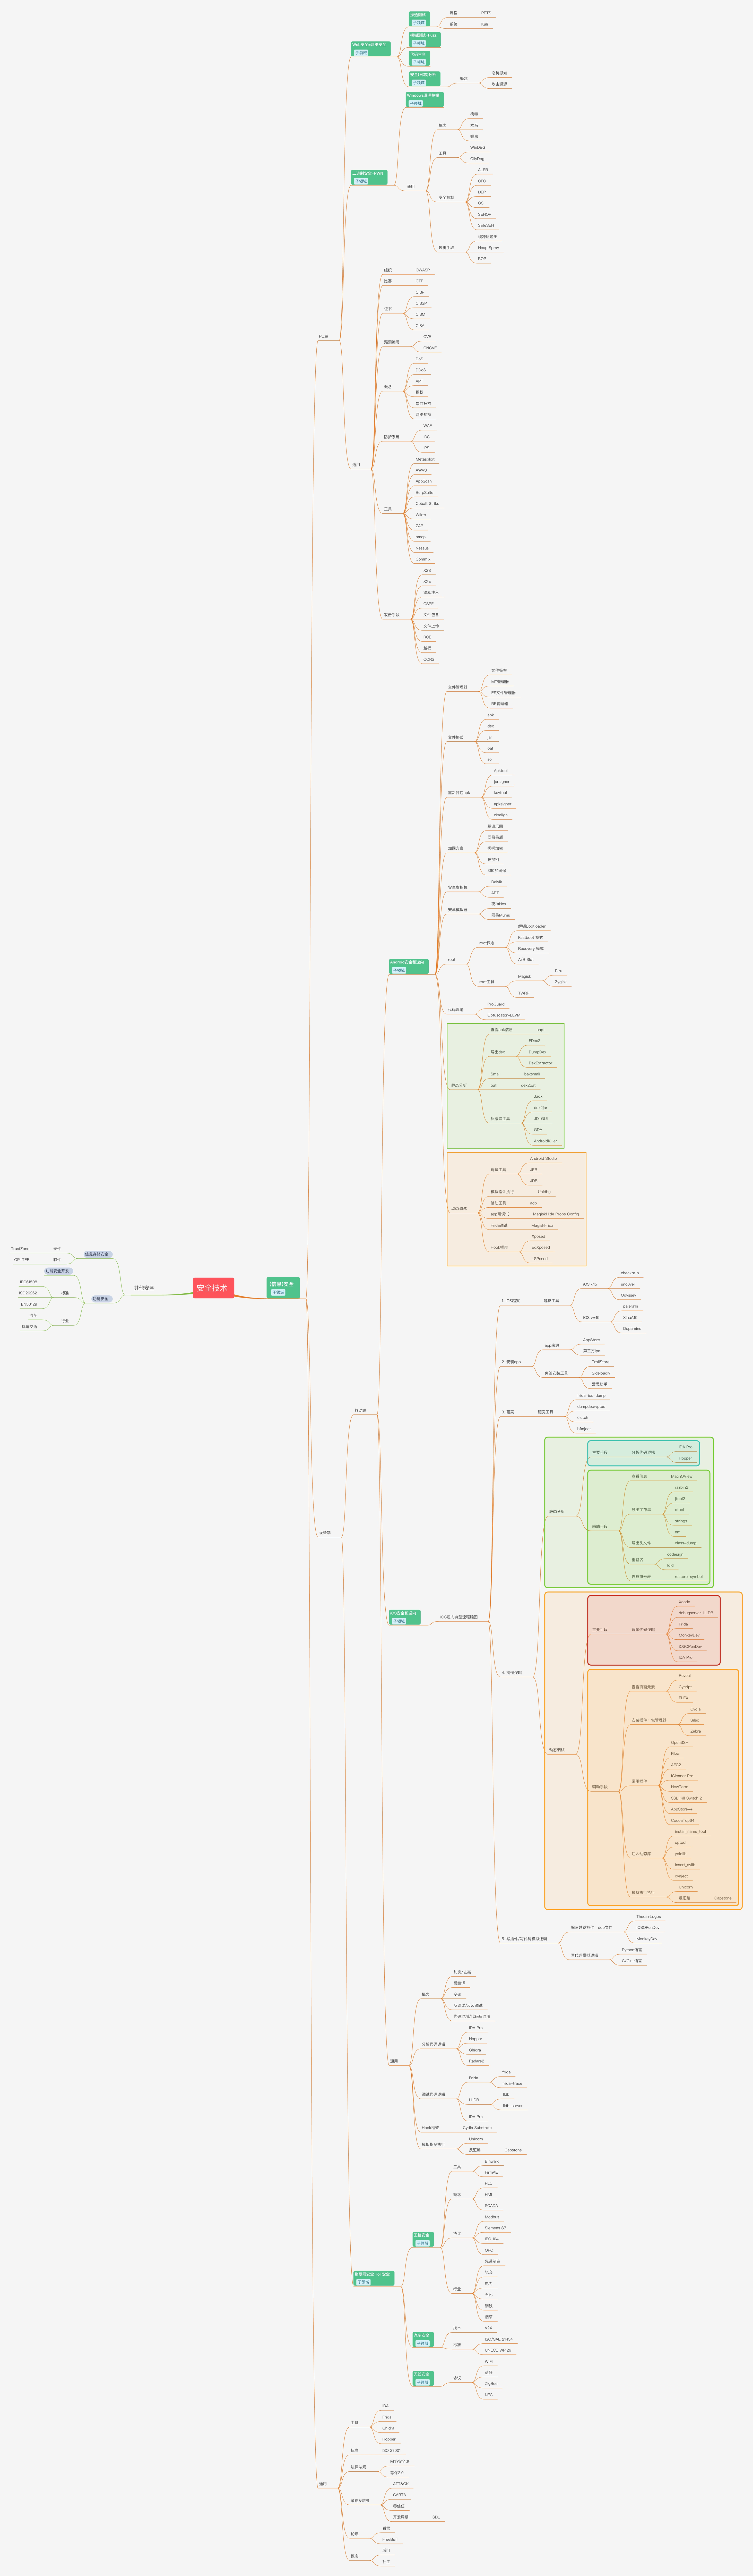 security_overview_mindmap